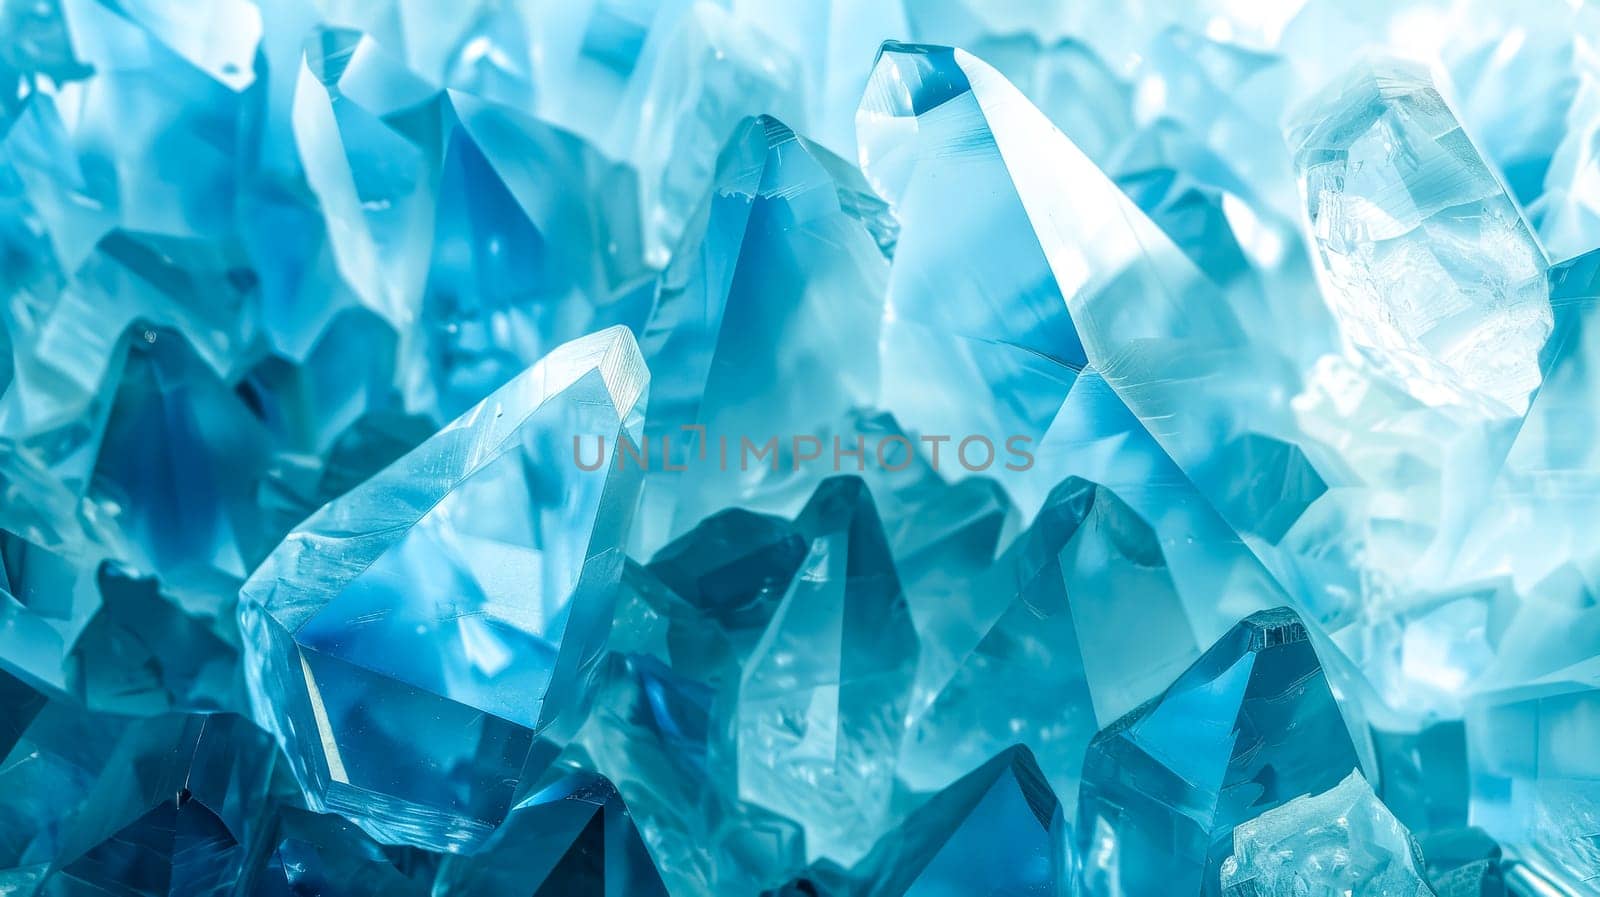 Vivid close-up view of blue crystal formations resembling ice by Edophoto